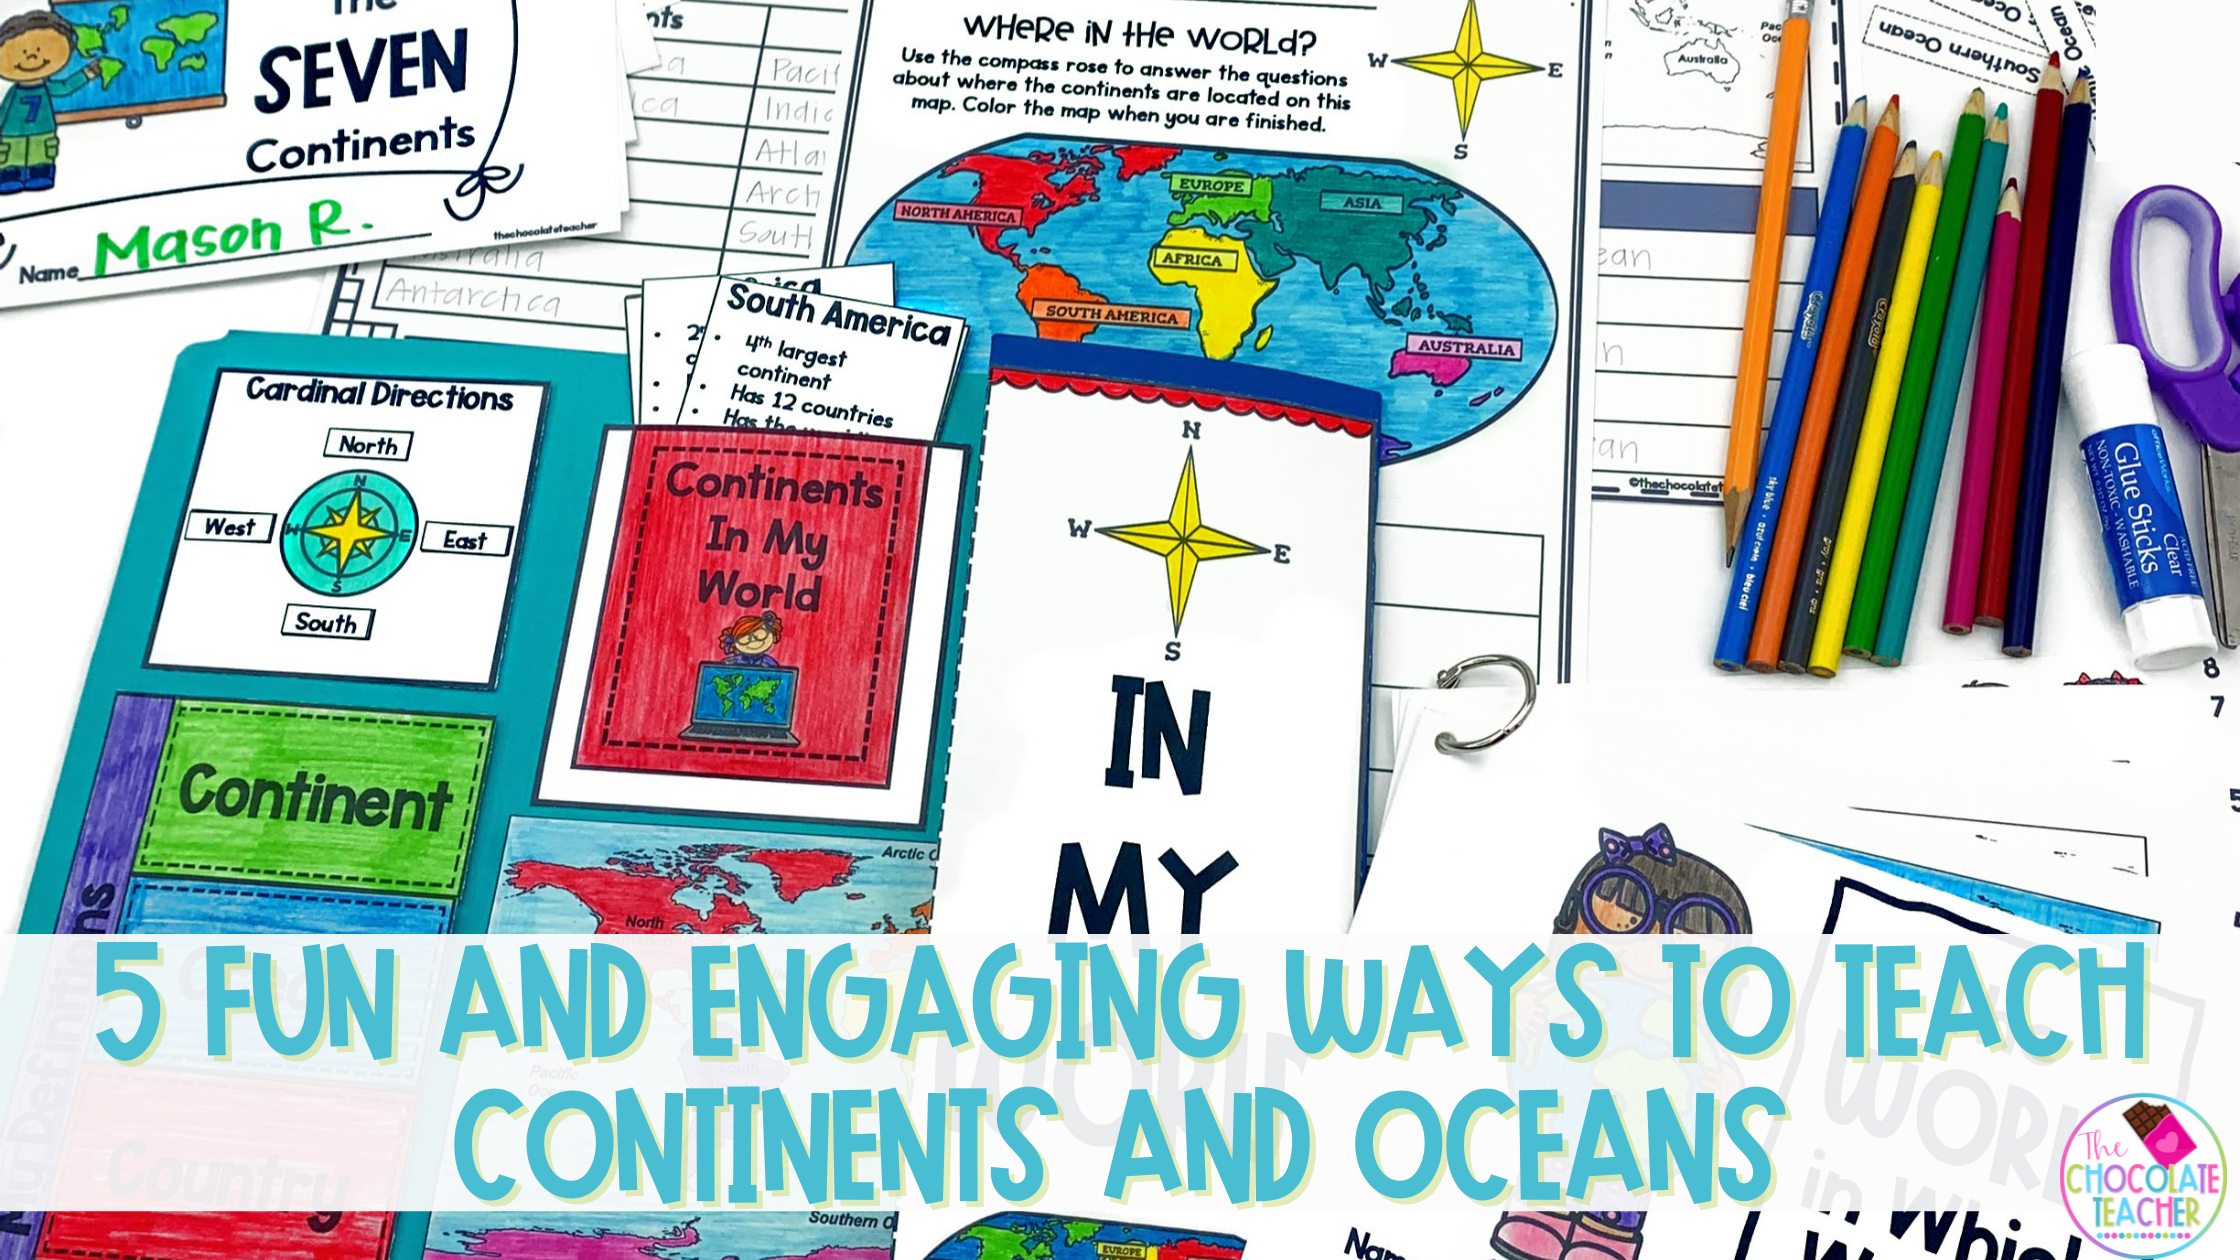 Use these 5 fun ways to teach continents and oceans in your classroom social studies units this year.